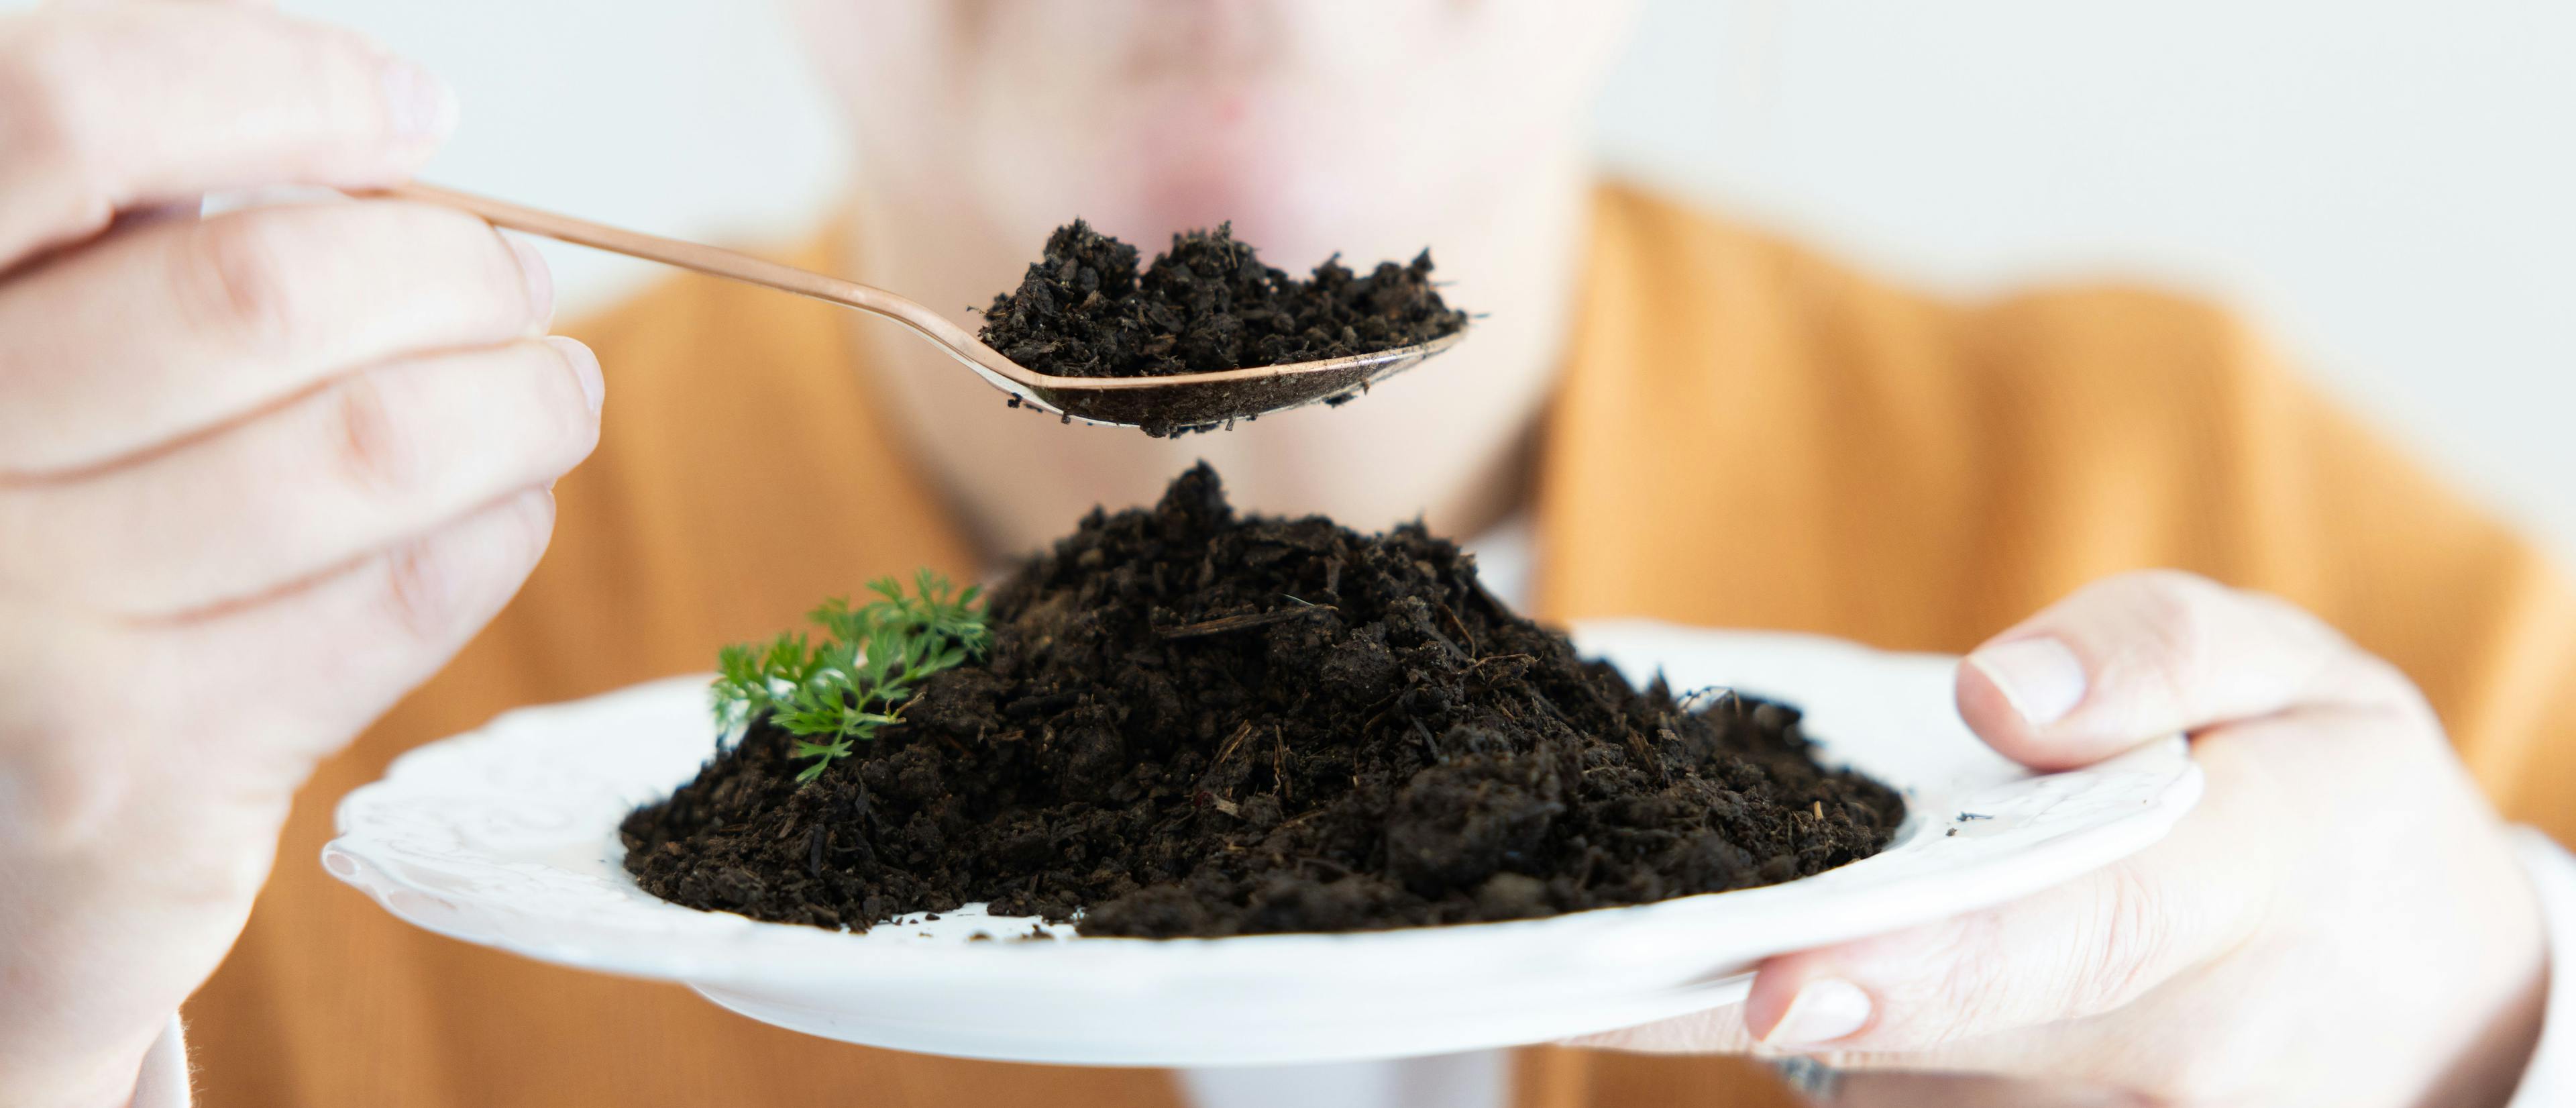 A woman scoops a spoonful of soil from a plate.